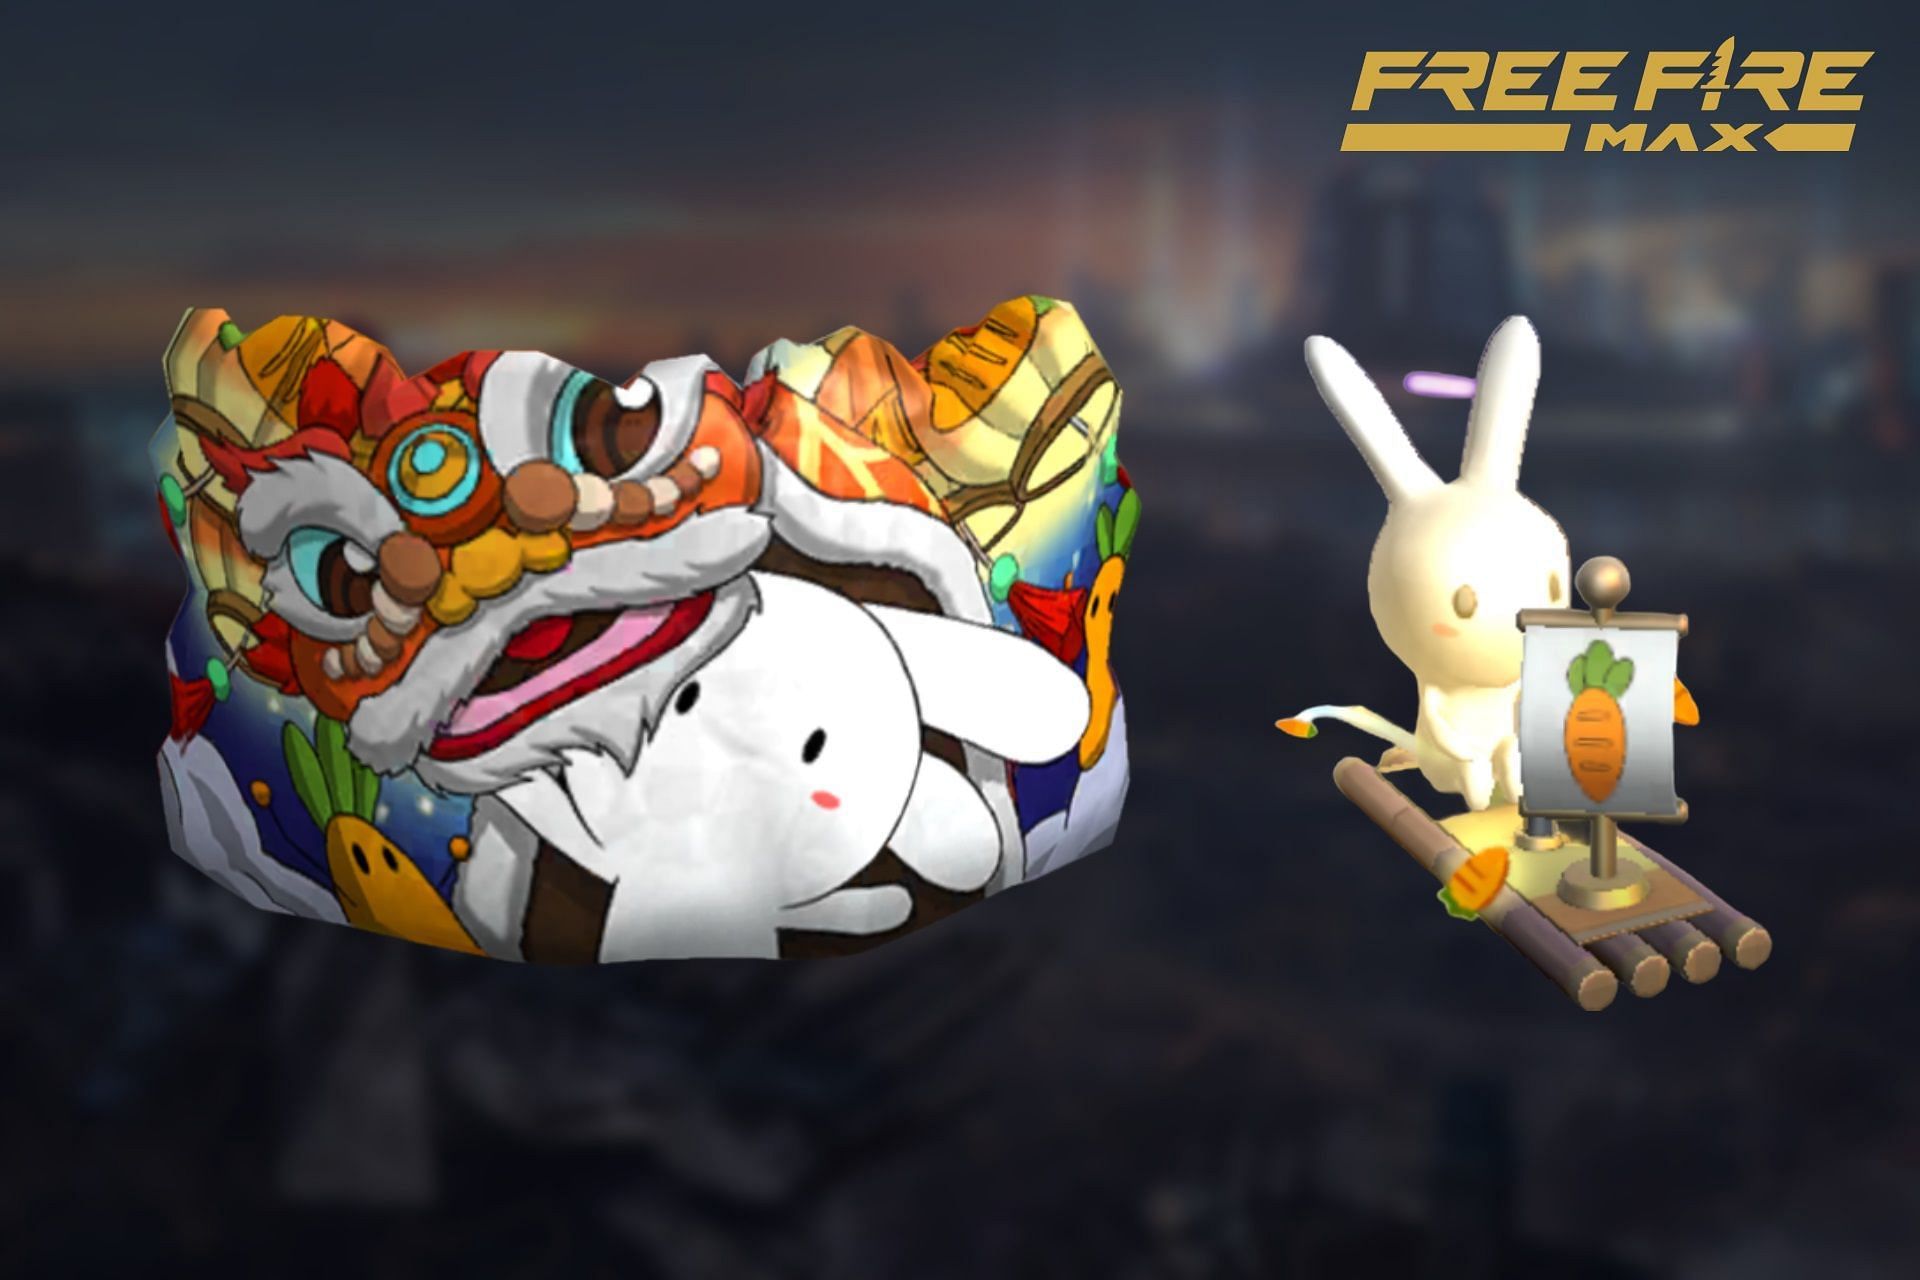 The two rewards in the new Free Fire MAX top-up event (Image via Garena)